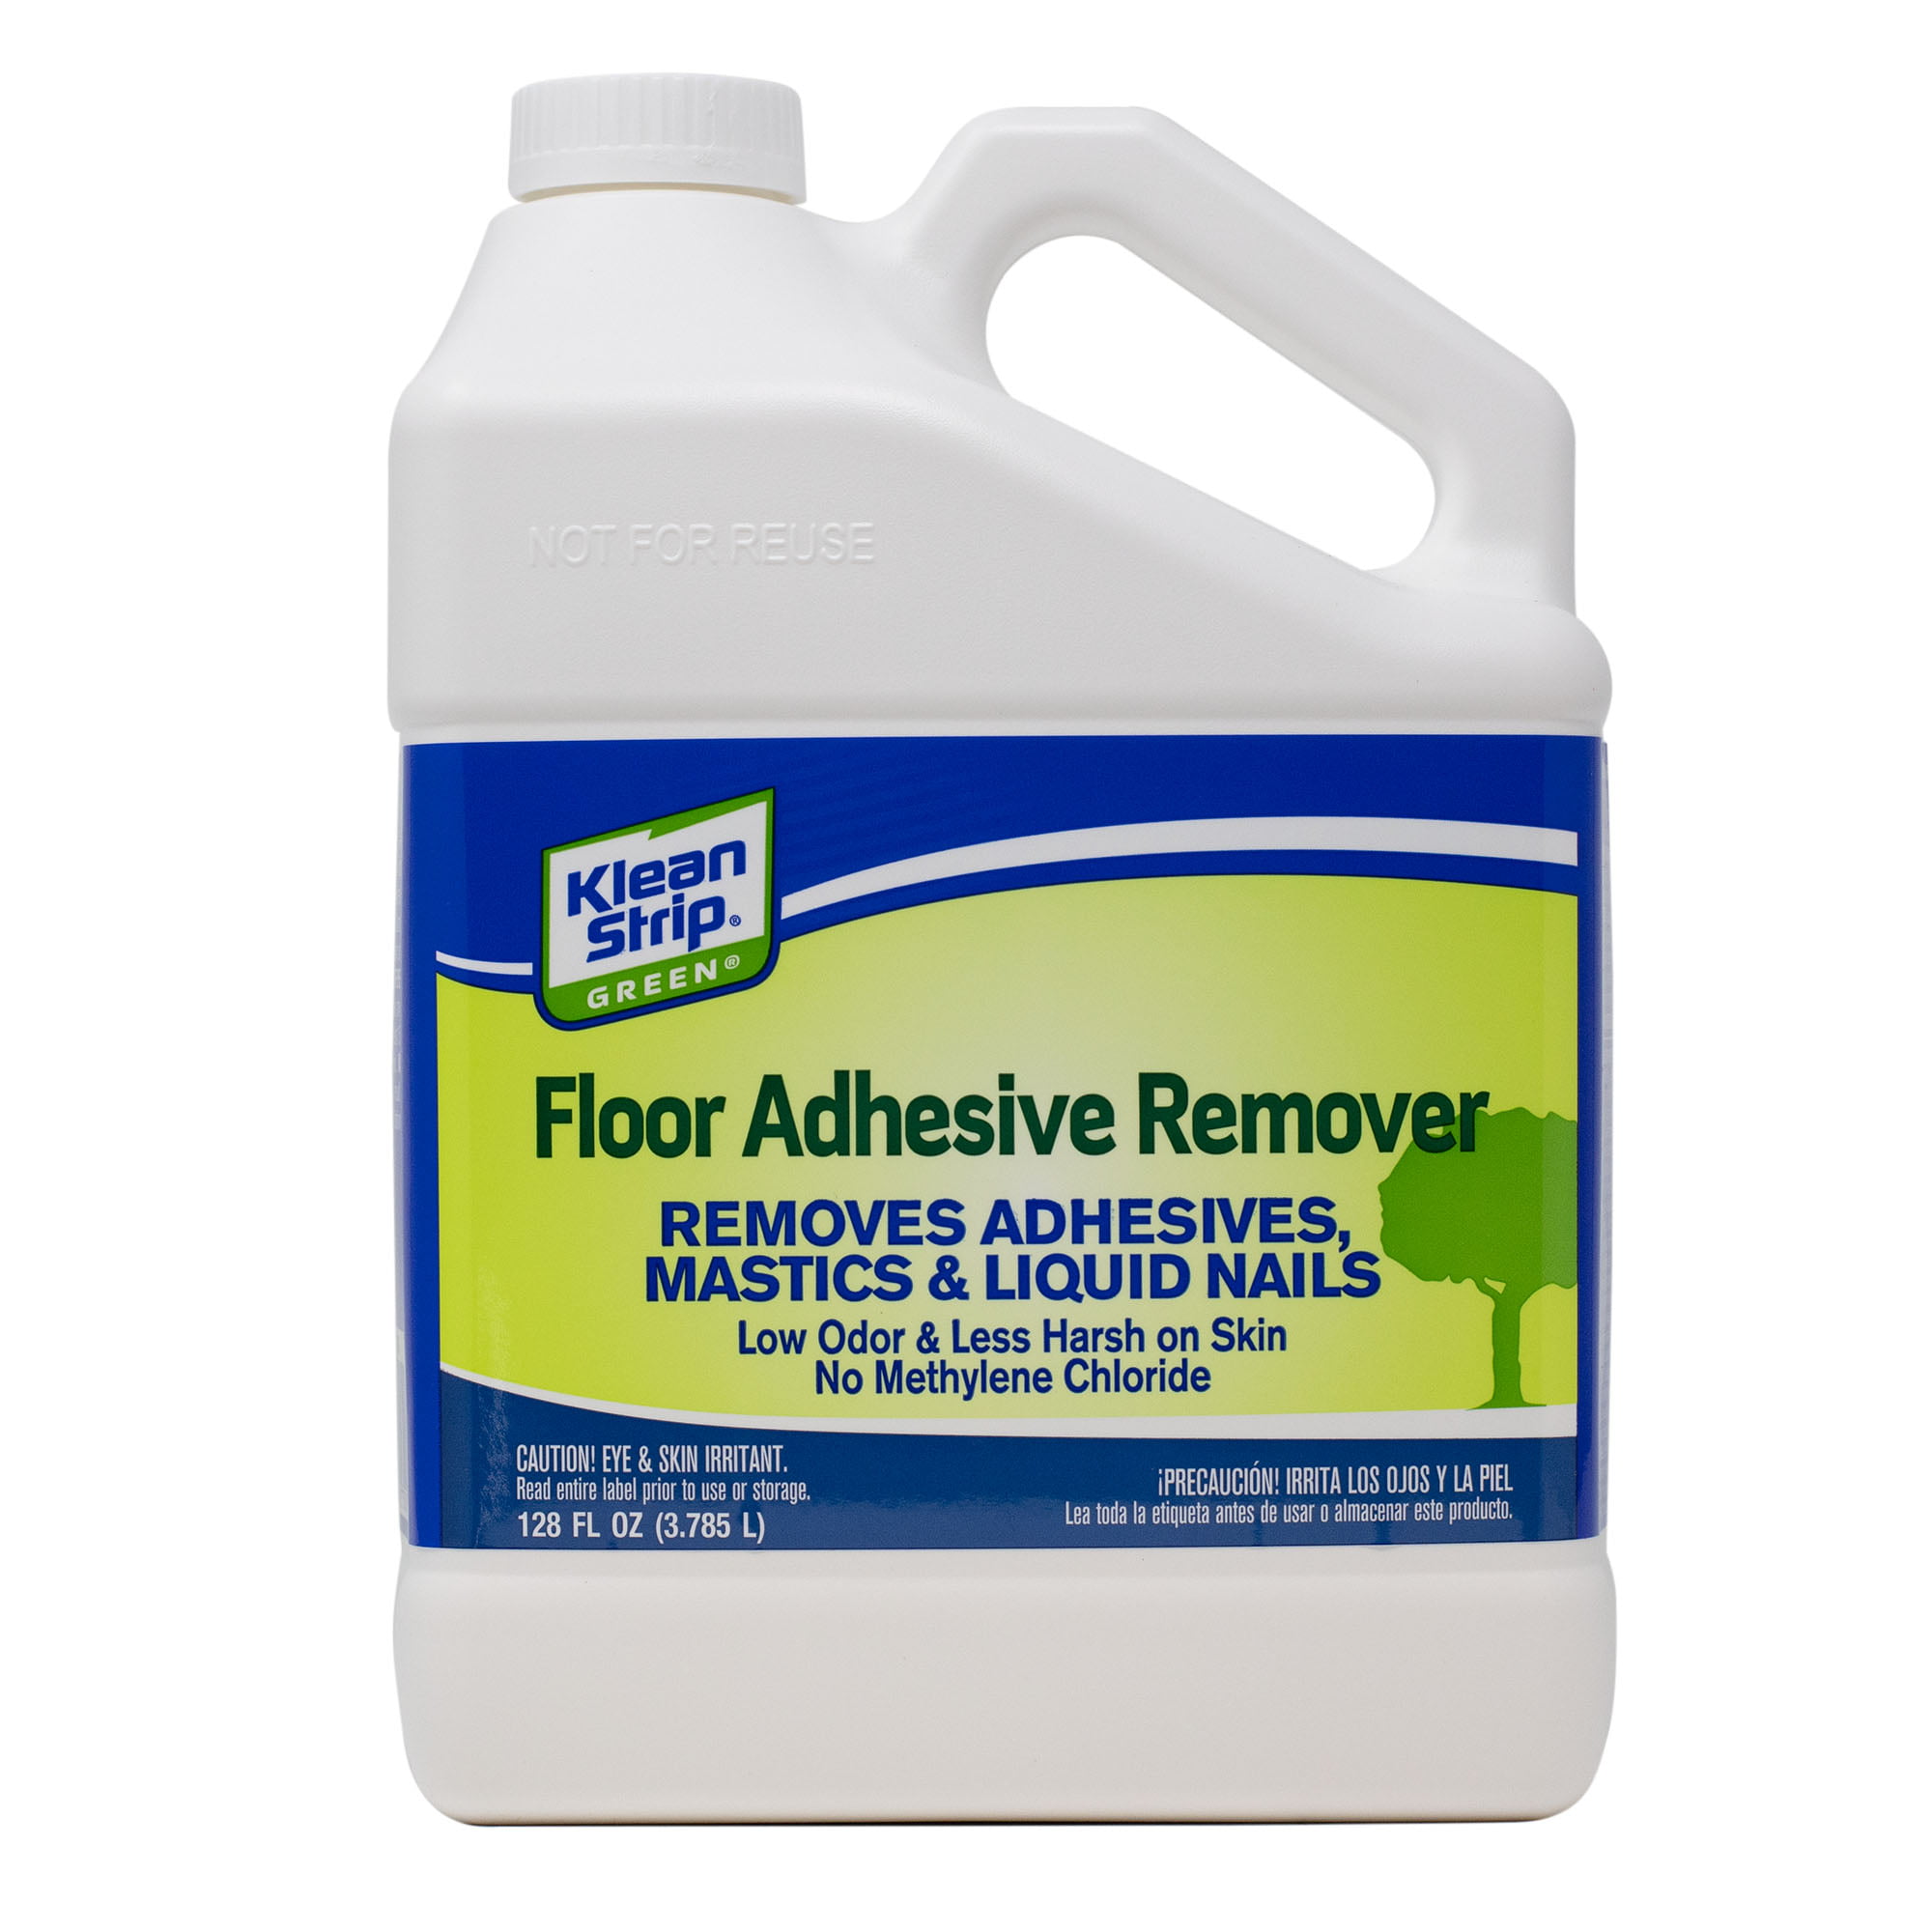 How To Remove Tile Adhesive From Floor